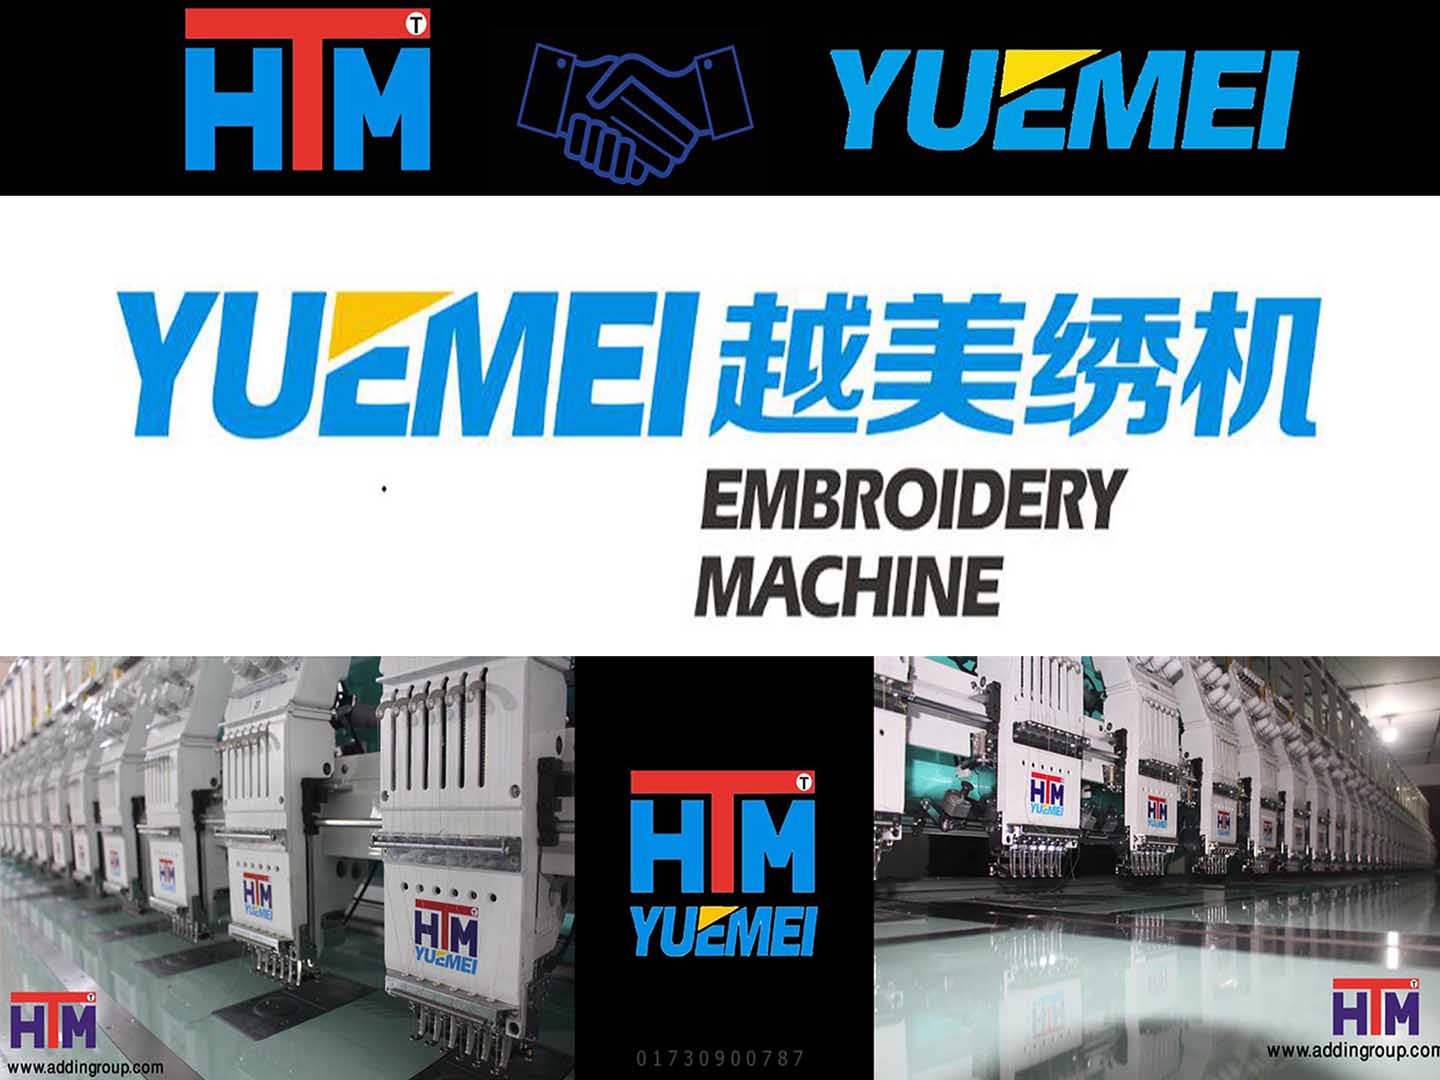 HTM-YUEMEI EMBROIDERY MACHINE